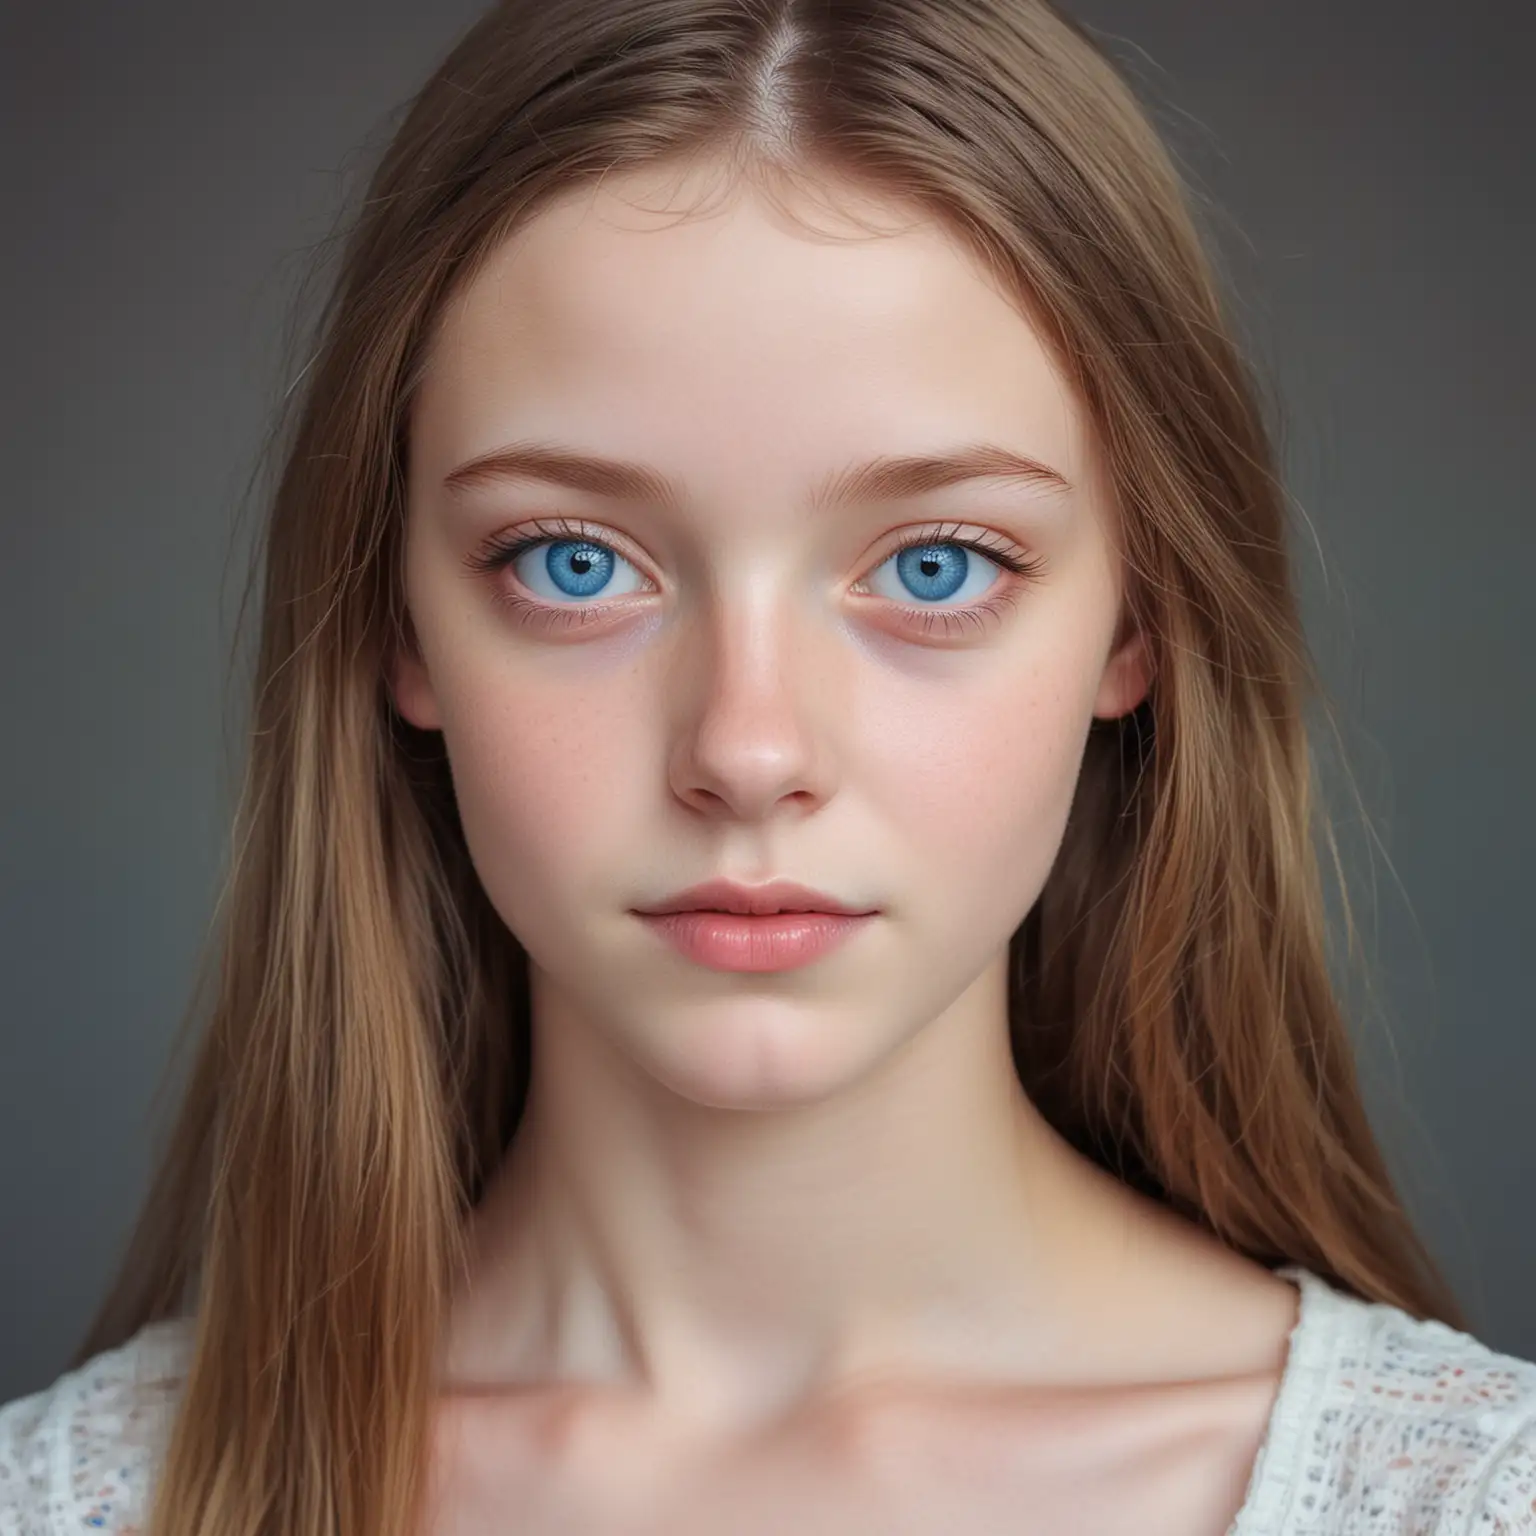 skinny pale teen girl with blue eyes face portrait